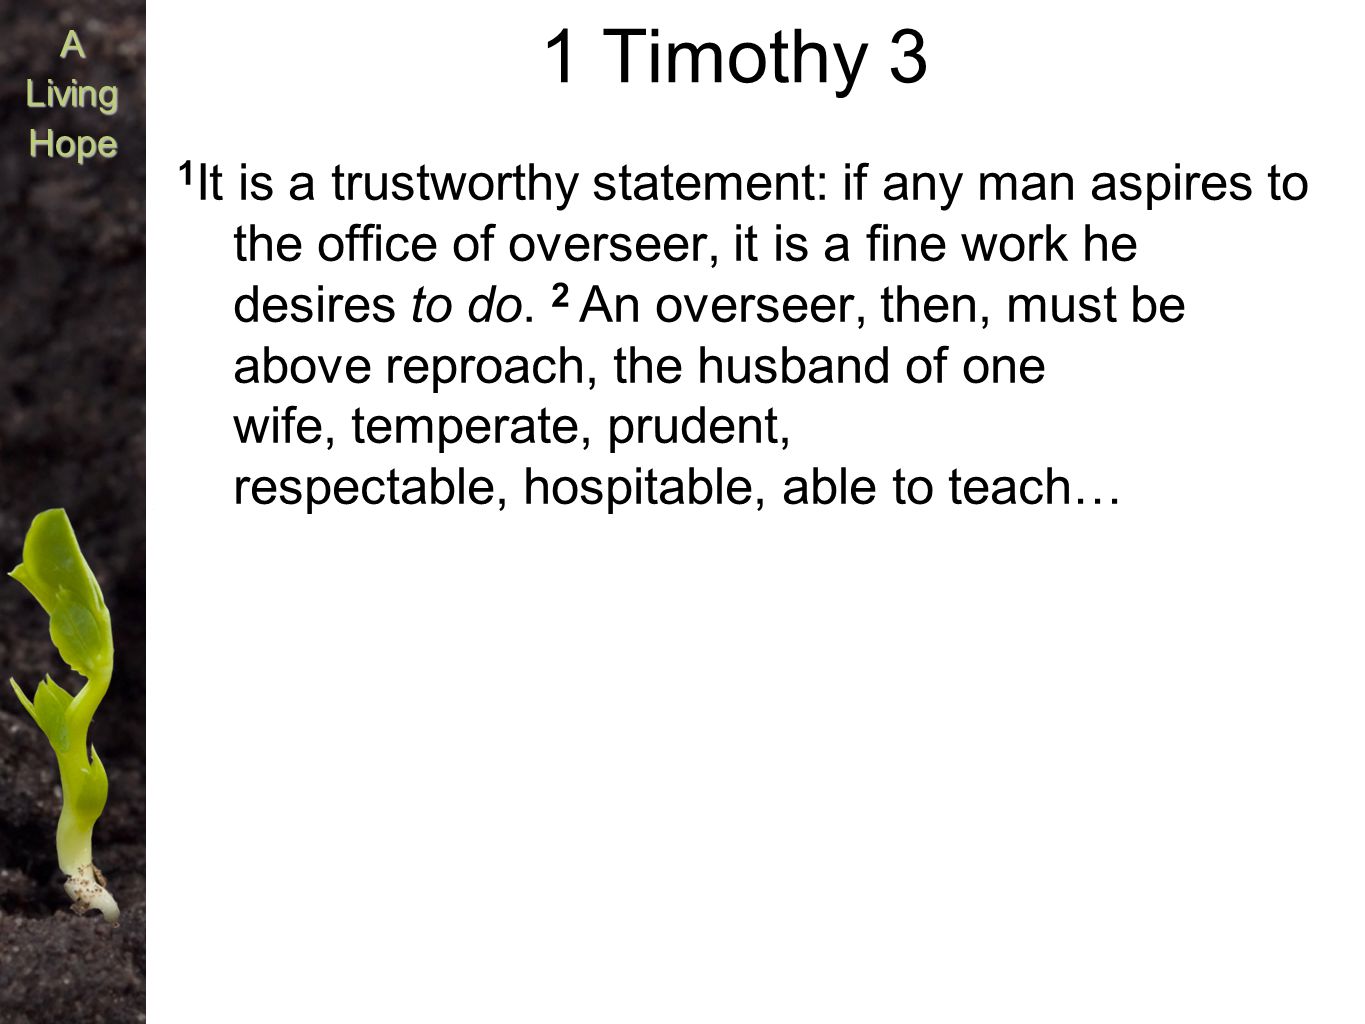 A Living Hope 1 Timothy 3 1 It is a trustworthy statement: if any man aspires to the office of overseer, it is a fine work he desires to do.